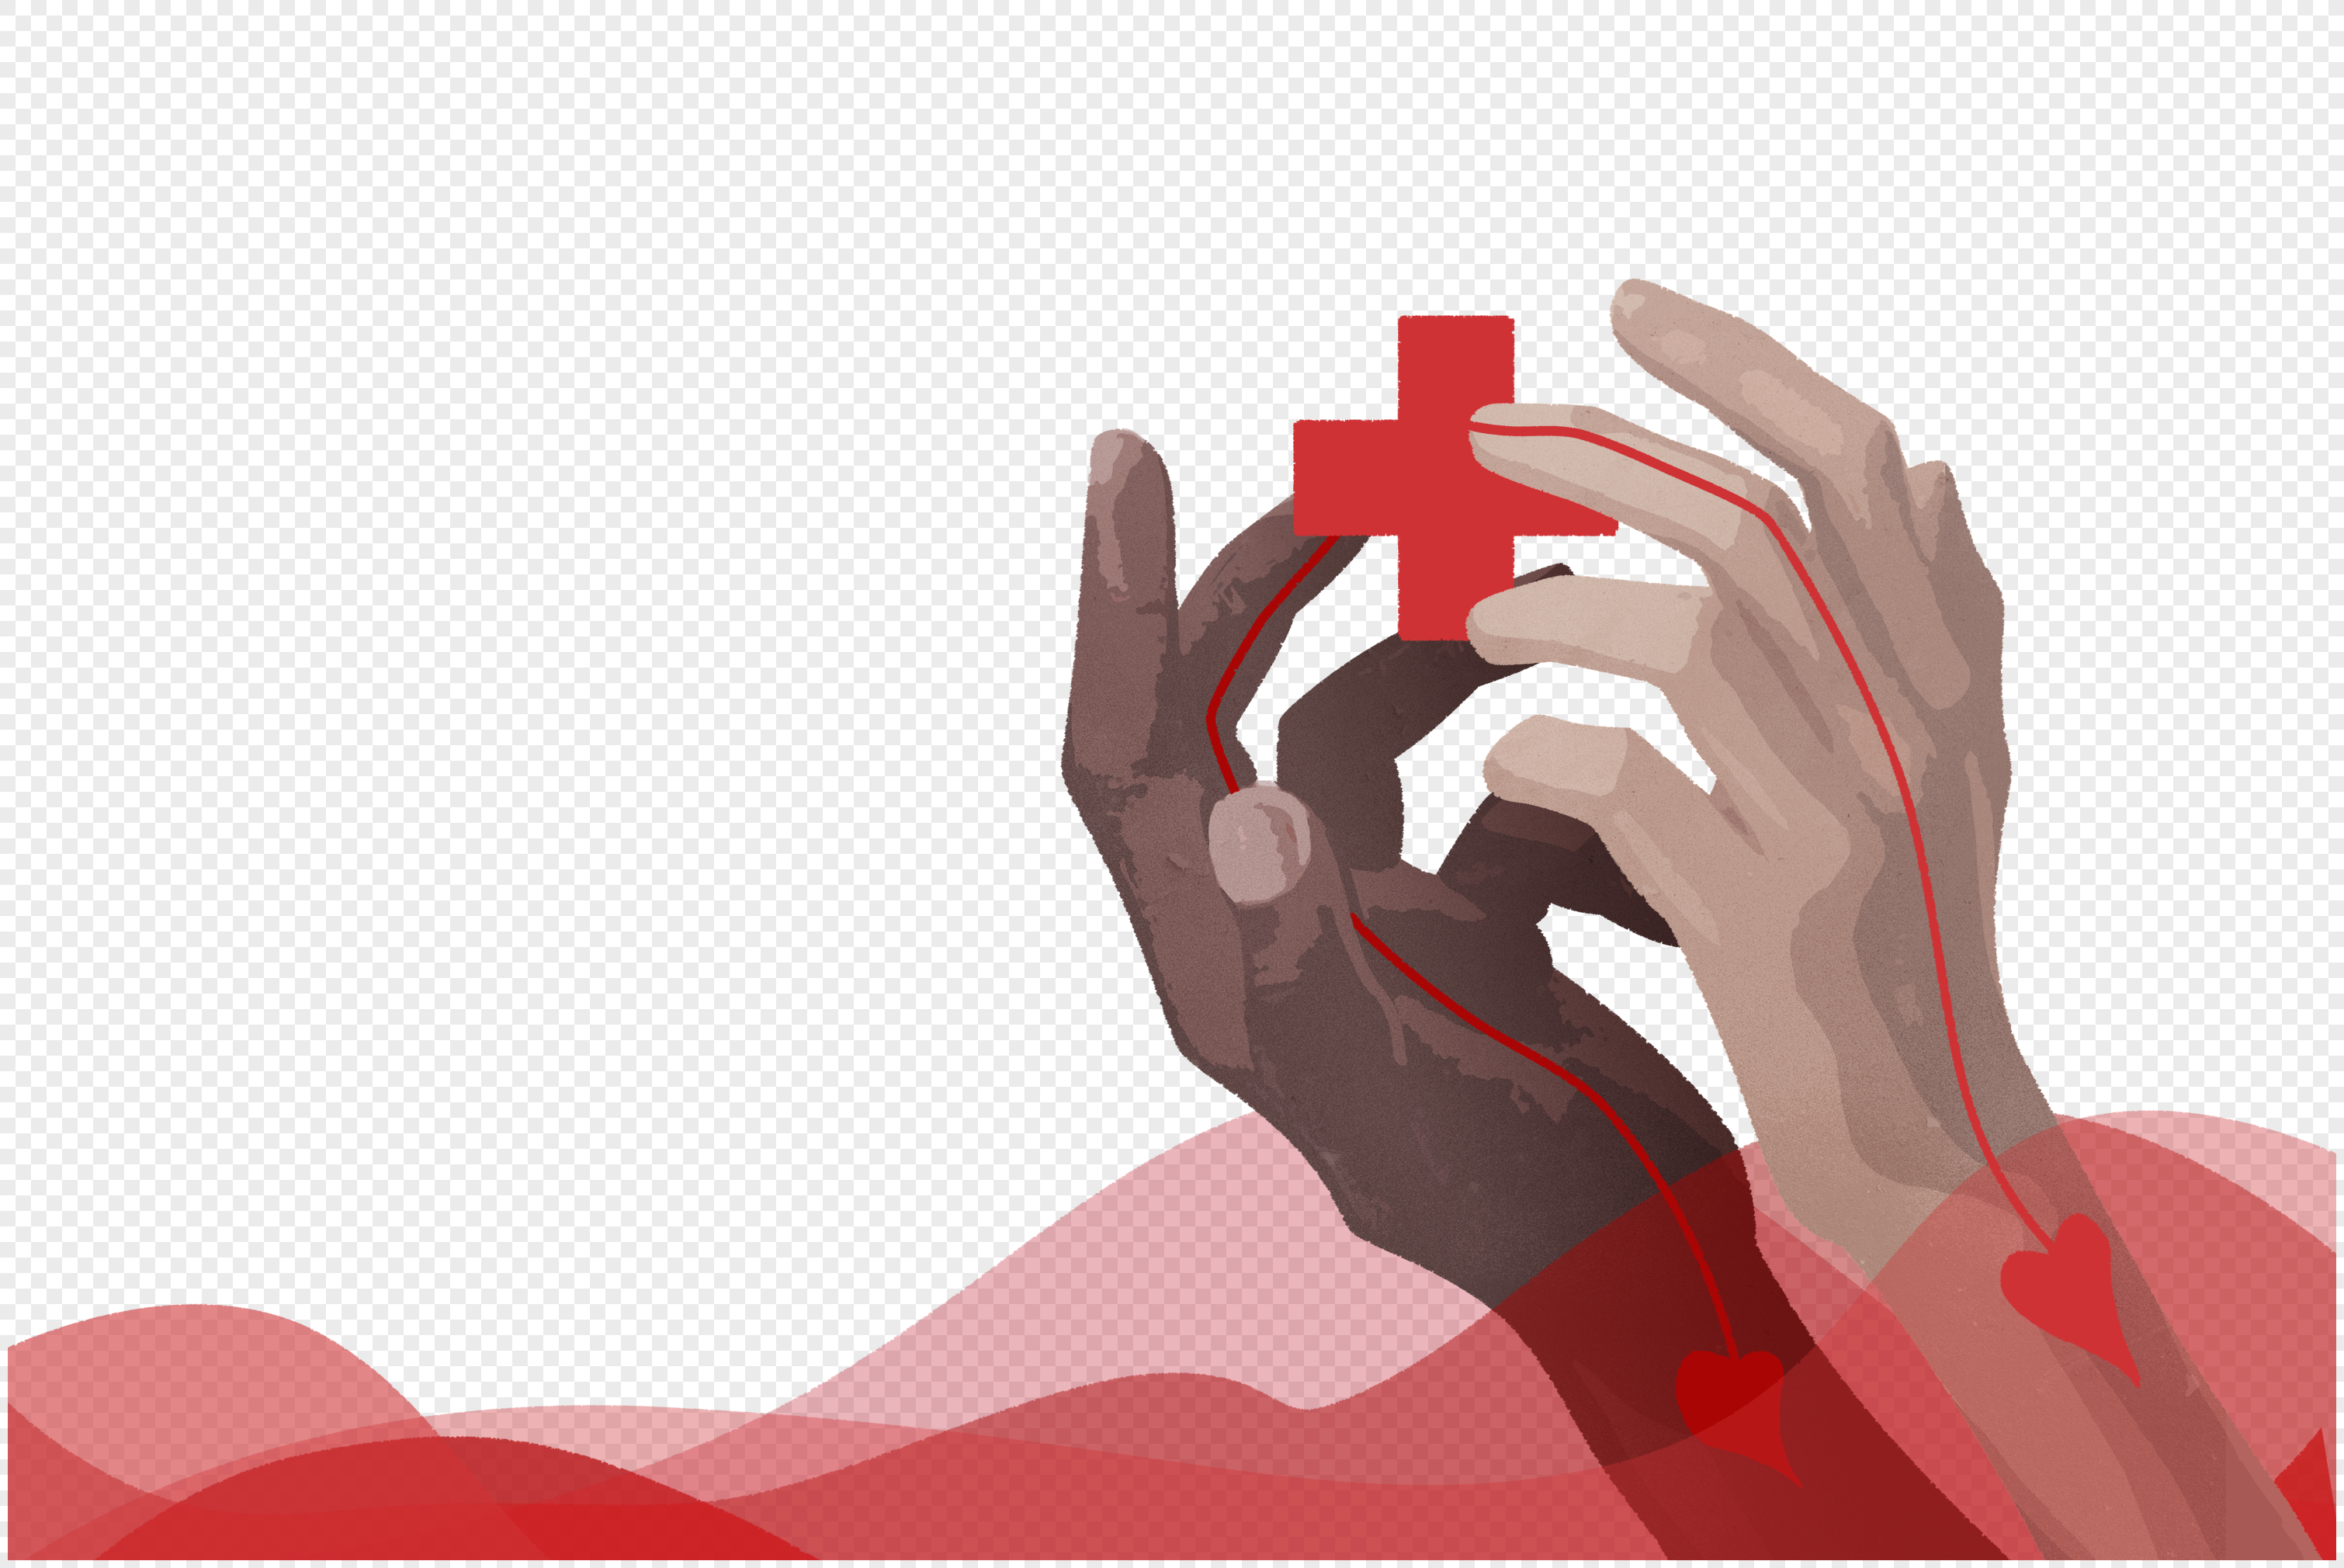 Red Cross Icon Images  Free Photos, PNG Stickers, Wallpapers & Backgrounds  - rawpixel